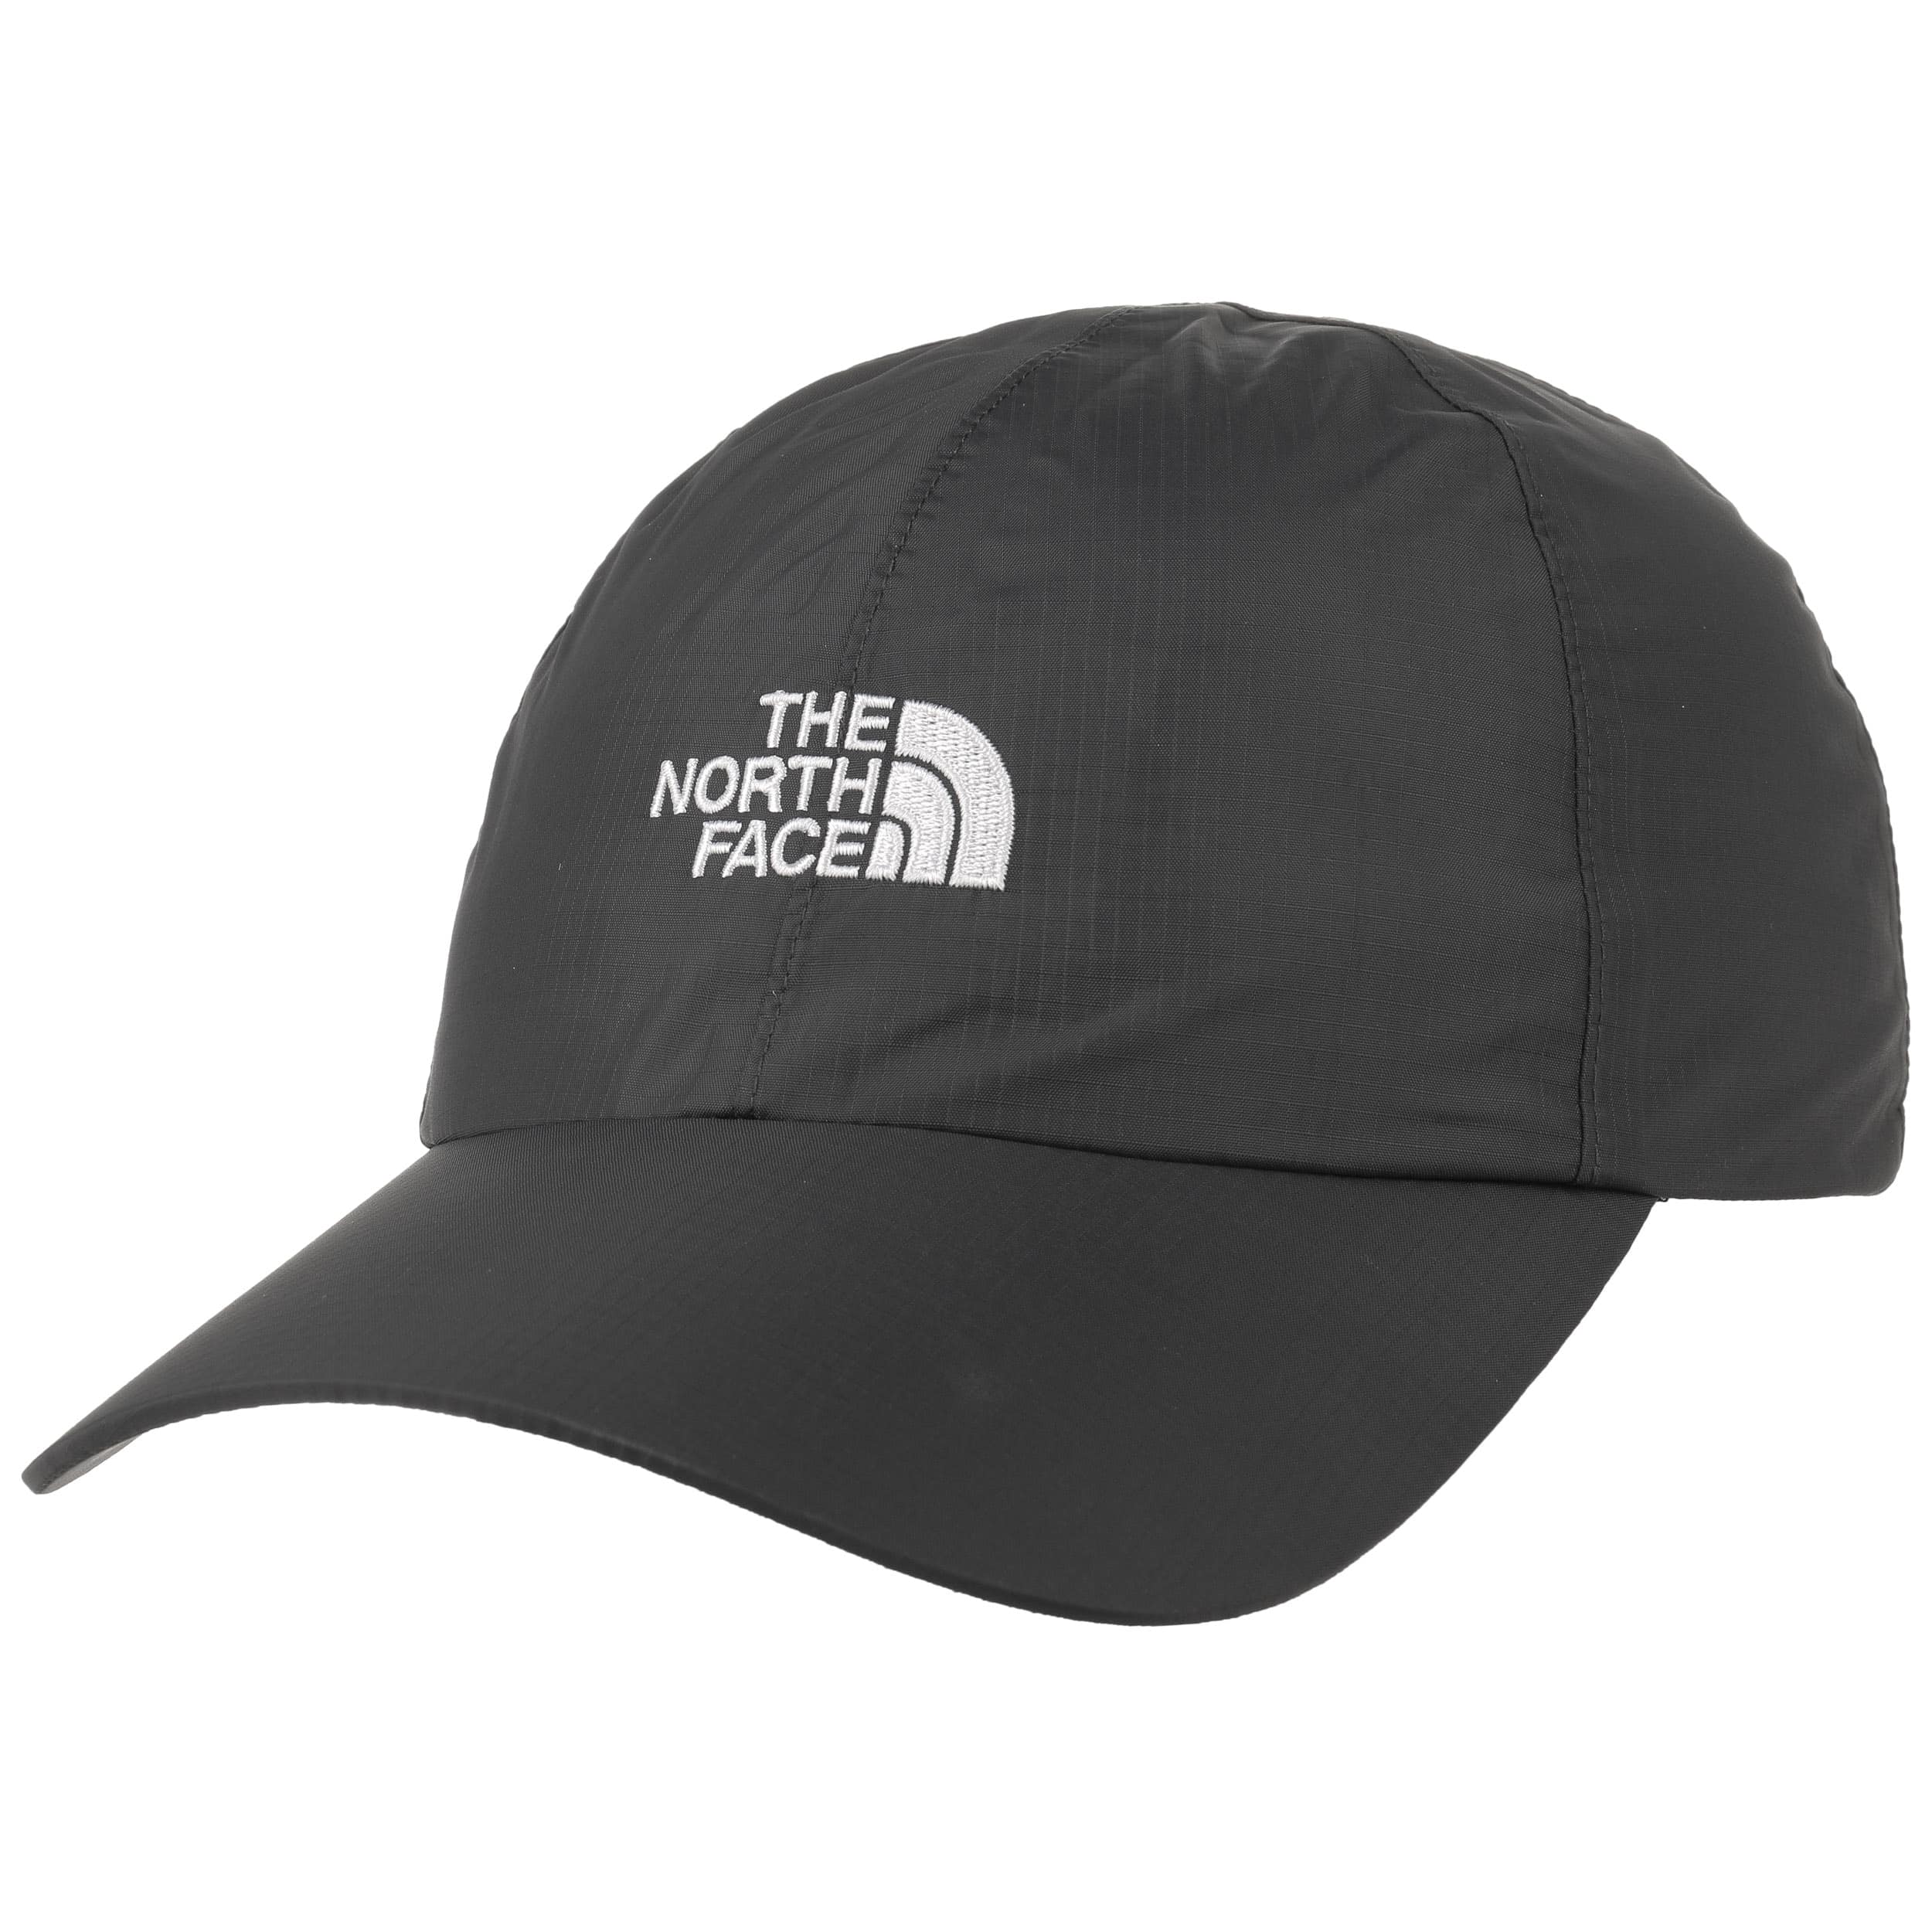 Dryvent Logo Cap by The North Face